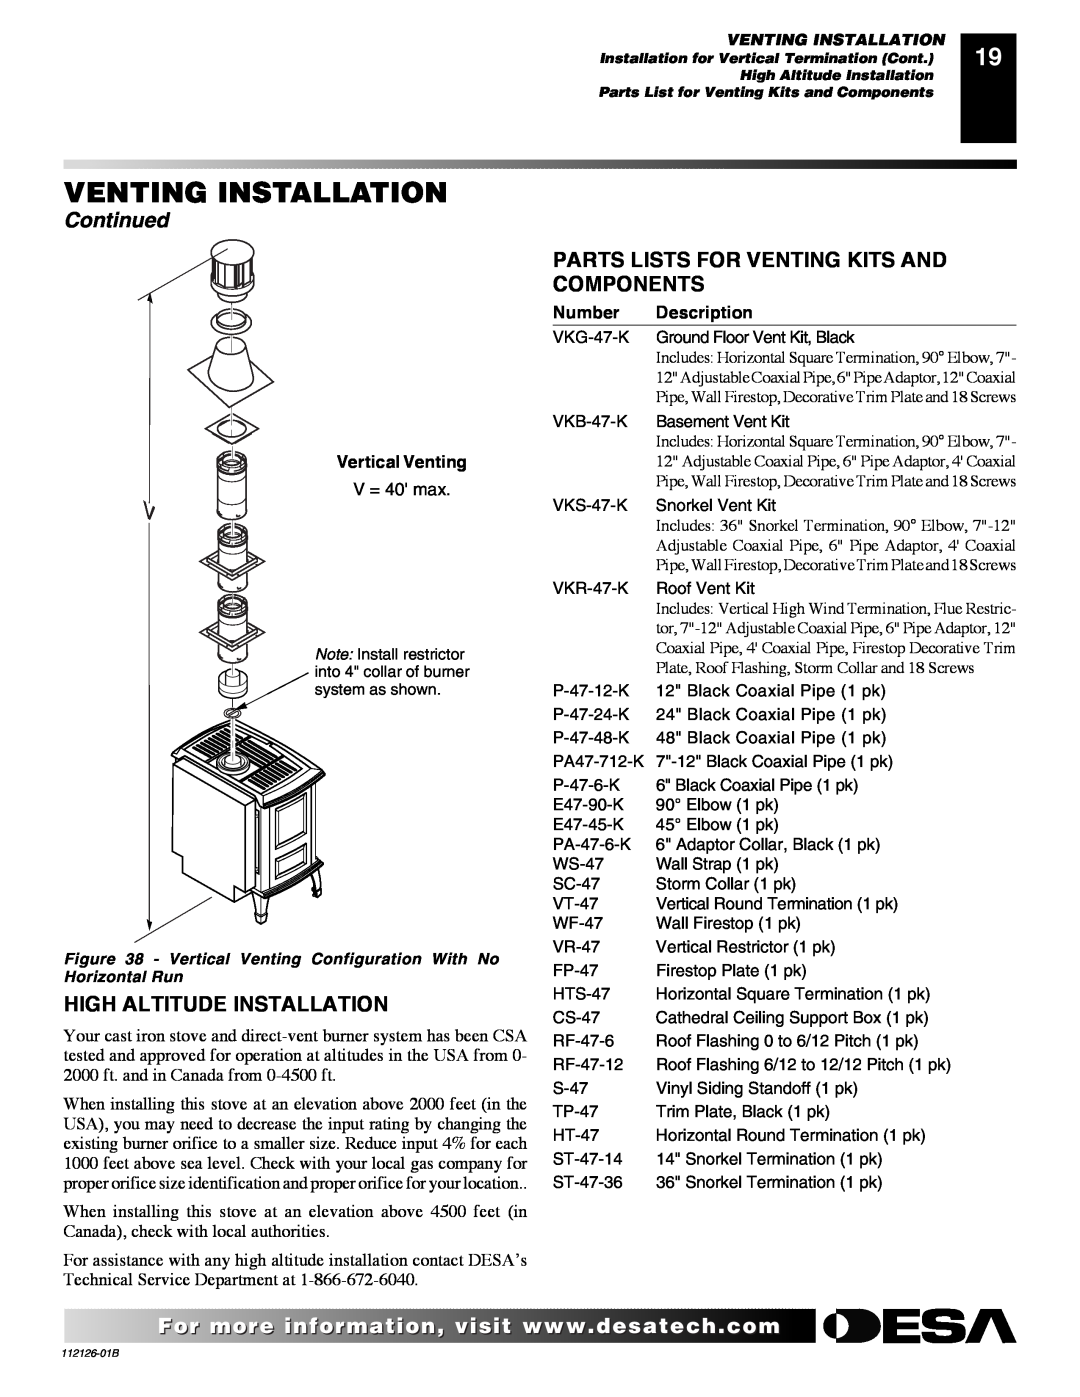 Desa SDVBPD High Altitude Installation, Parts Lists For Venting Kits And Components, Venting Installation, Continued 